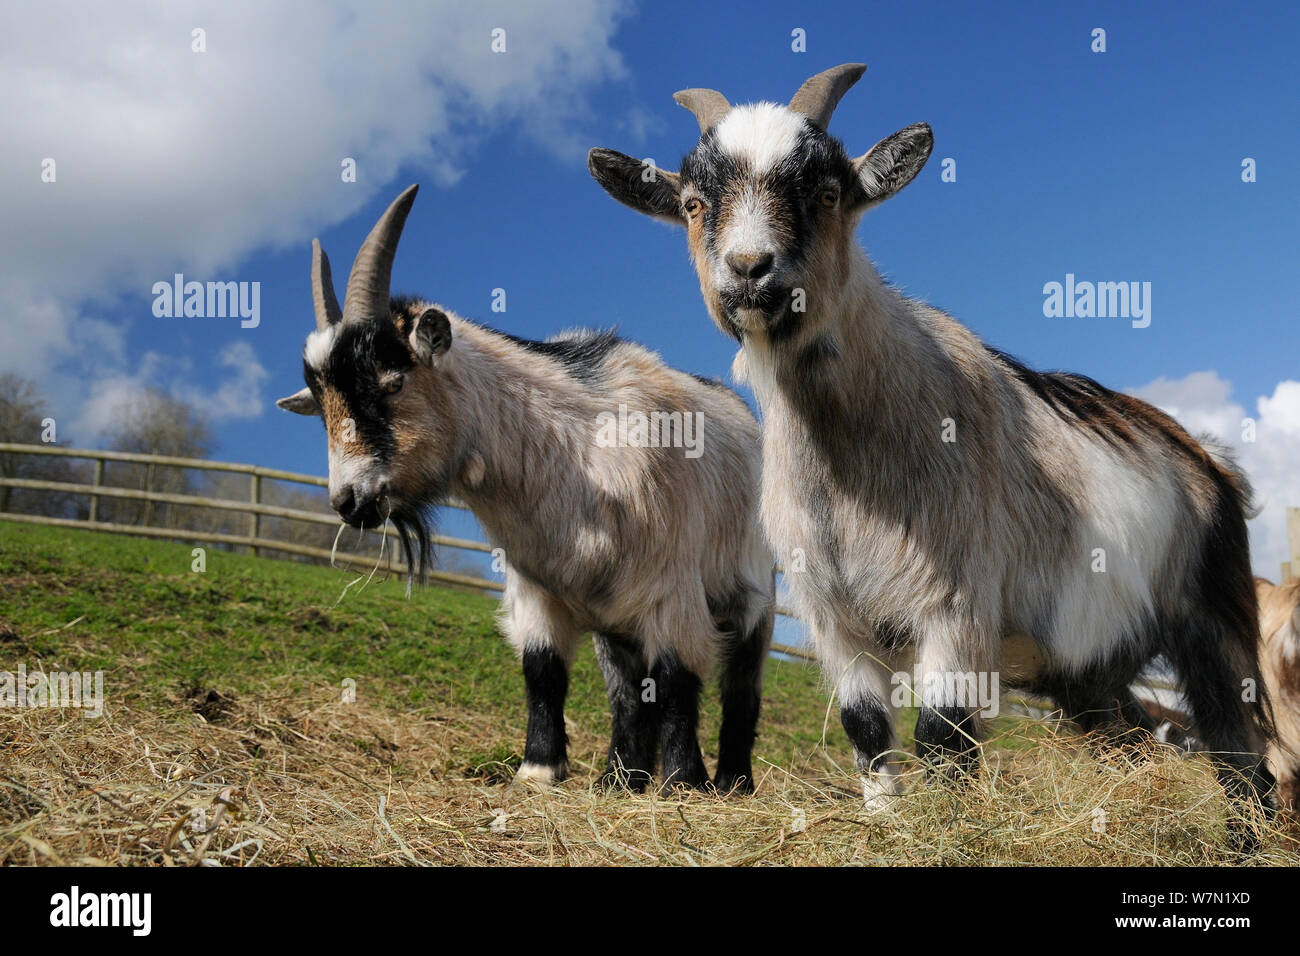 Two adult Pygmy goats (Capra hircus) grazing hay in a fenced paddock, Wiltshire, UK, March. Stock Photo